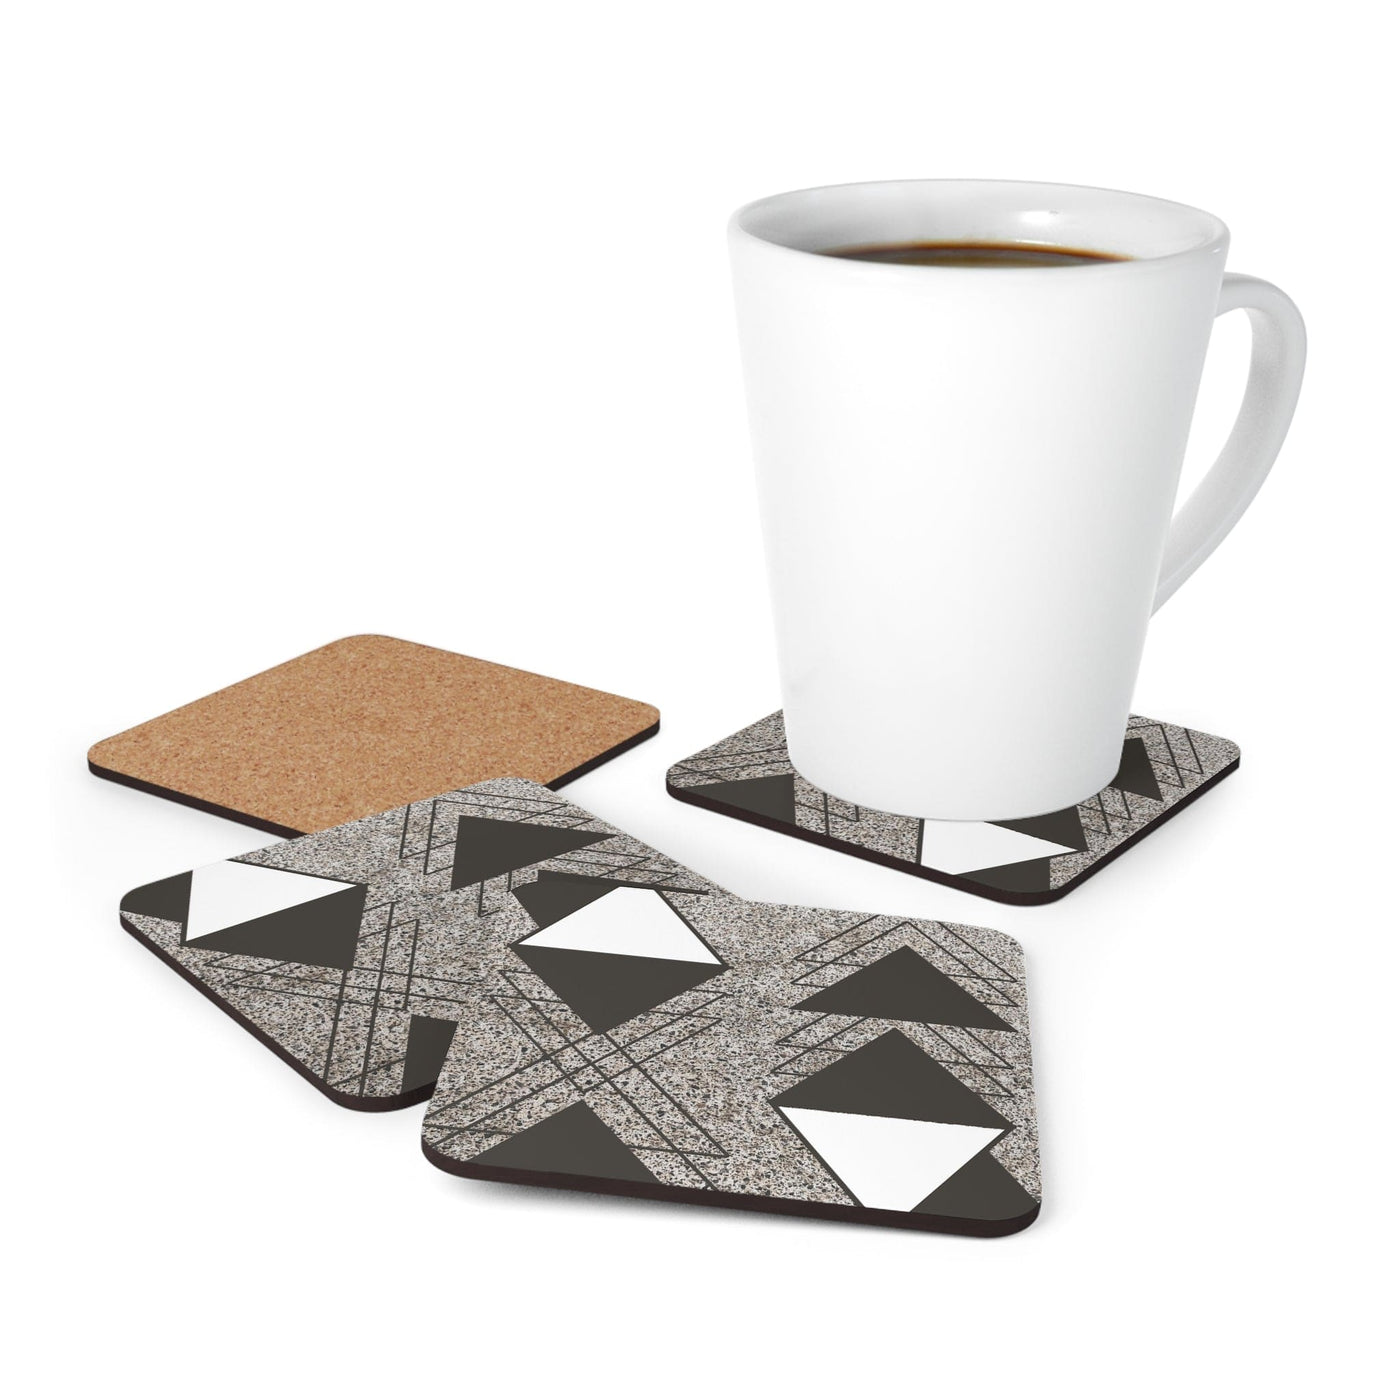 Coaster Set Of 4 For Drinks Brown And White Triangular Colorblock - Decorative